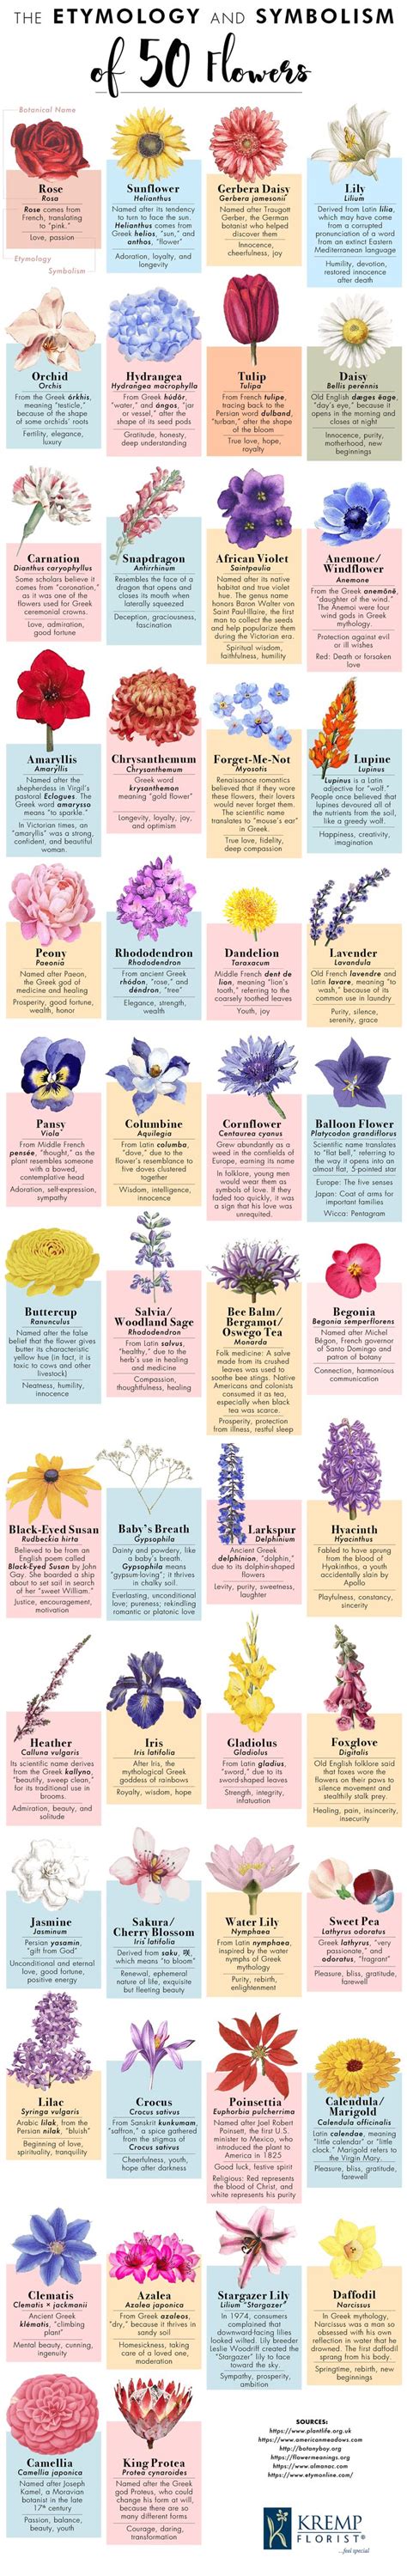 the etymology and symbolism of 50 flowers infographic pretty flower names different kinds of